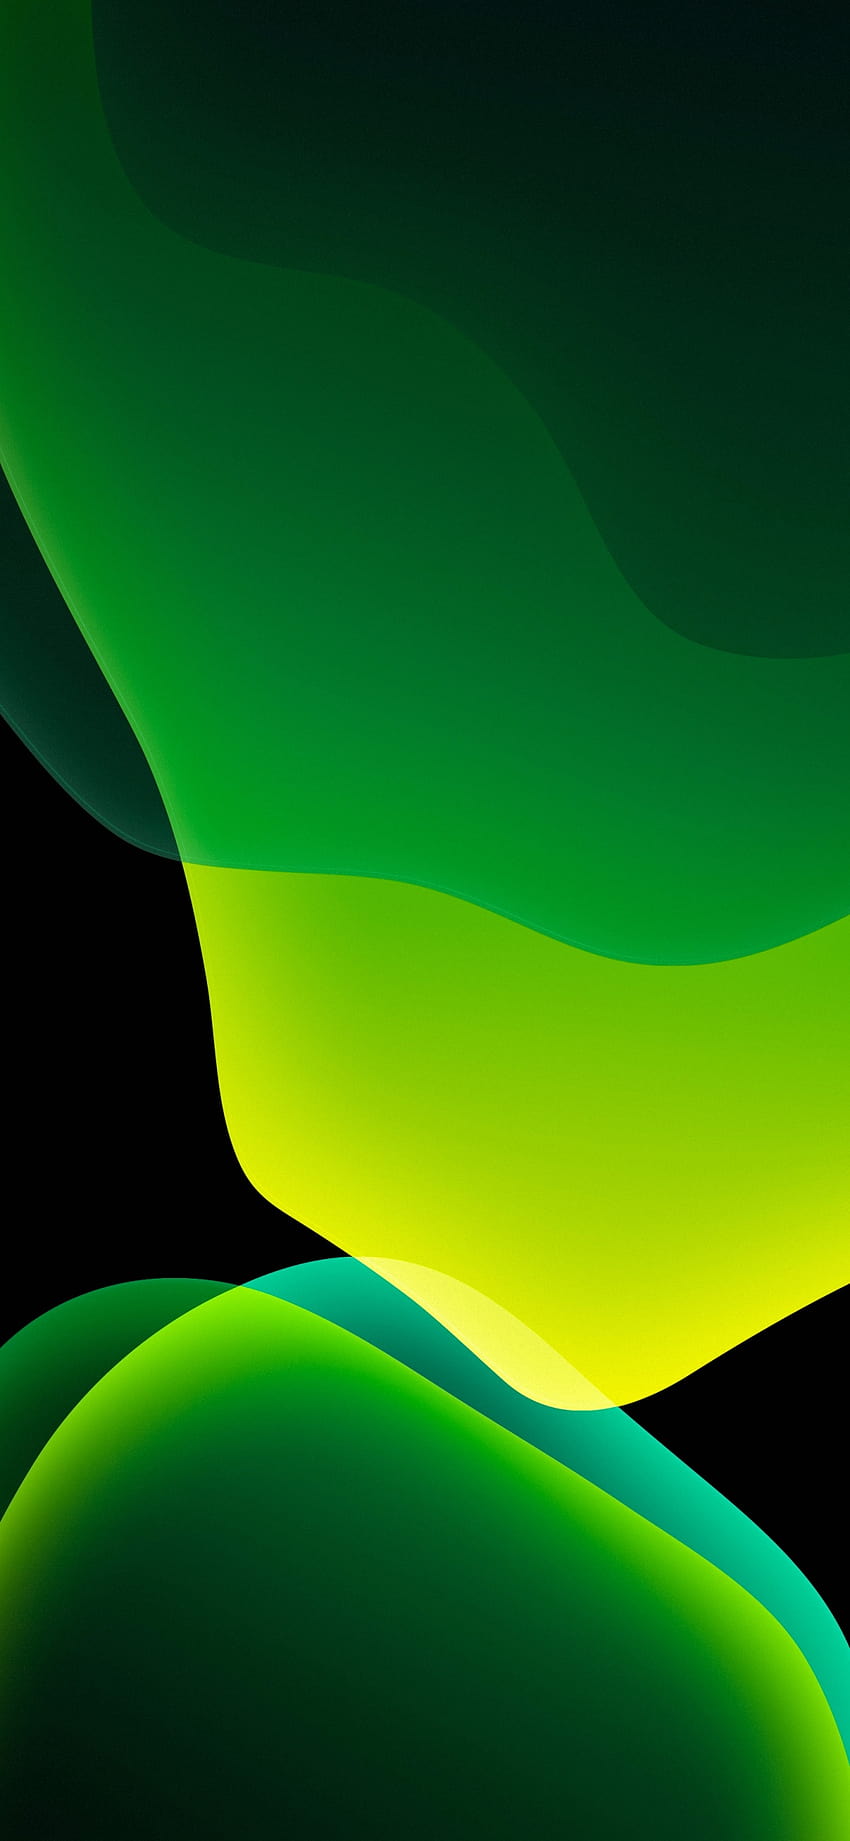 iOS 13 , Stock, iPadOS, Green, Black background, AMOLED, Abstract, iphone green and black HD phone wallpaper